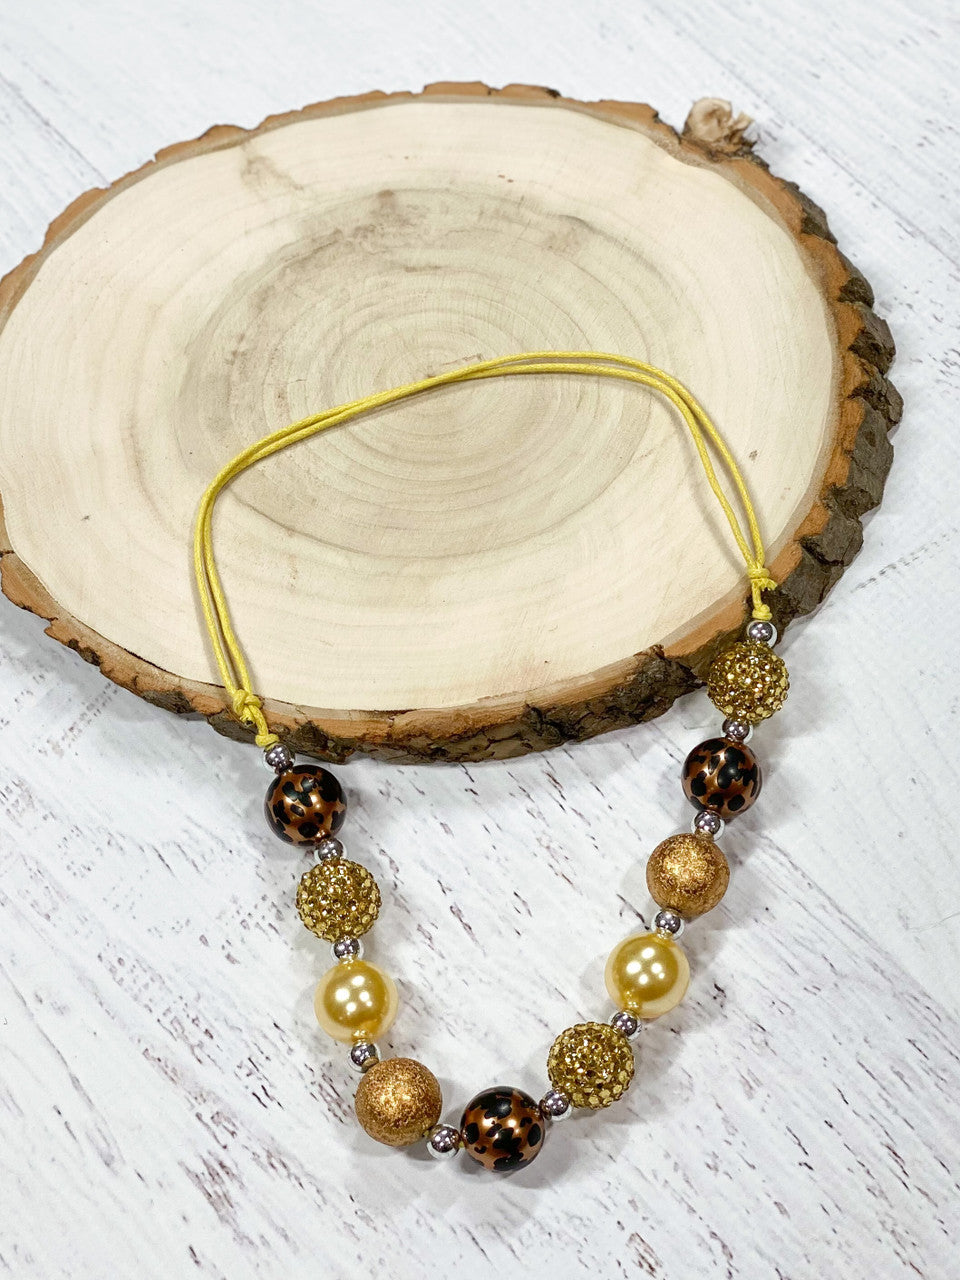 Adjustable brown, animal print and gold necklace, 17"